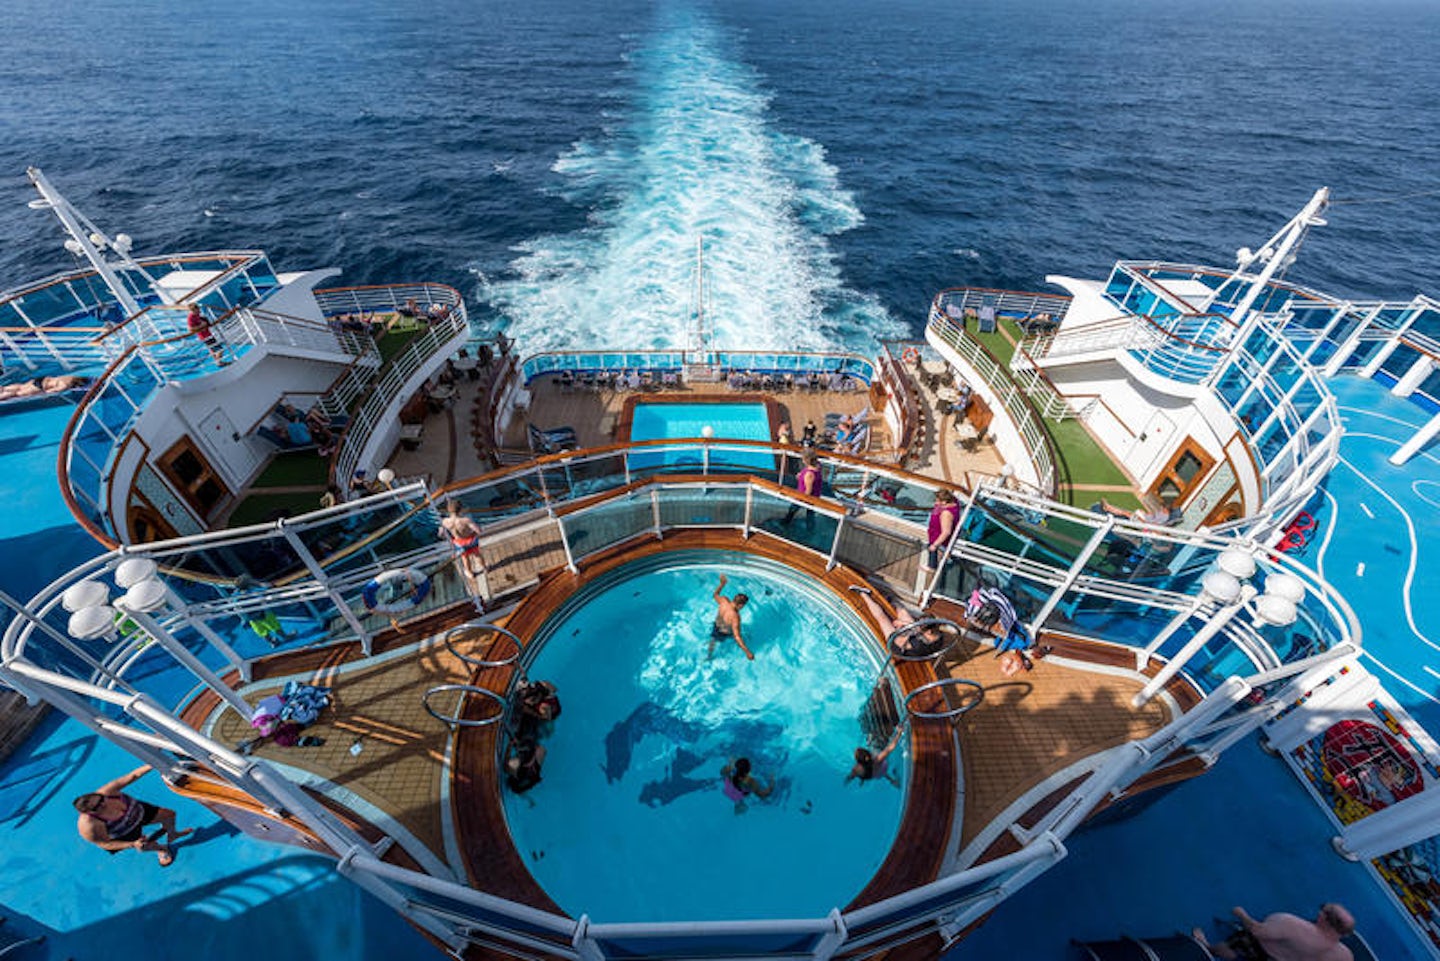 "Chill Out" Family Splash Pool on Emerald Princess